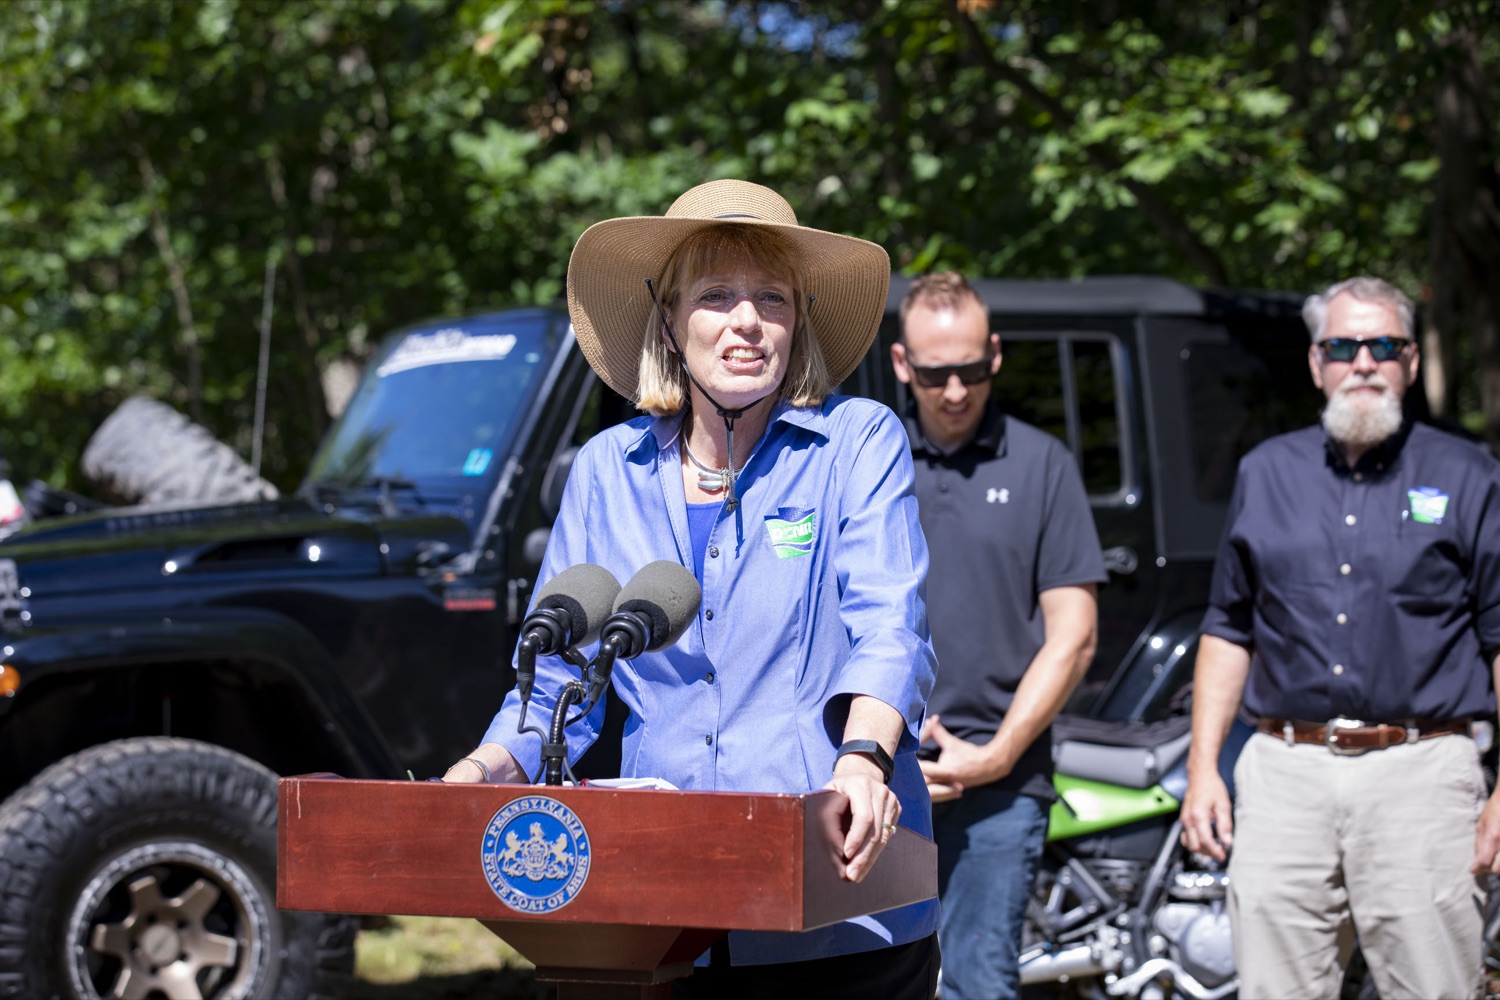 DCNR Secretary Cindy Adams Dunn announces a new motorized recreation area in Weiser State Forest District that will expand opportunities for ATVs, dirt bikes, off-highway vehicles, and other forms of recreation  in McAdoo, PA on August 12, 2022.<br><a href="https://filesource.amperwave.net/commonwealthofpa/photo/22090_dcnr_RecreationArea_16.jpg" target="_blank">⇣ Download Photo</a>